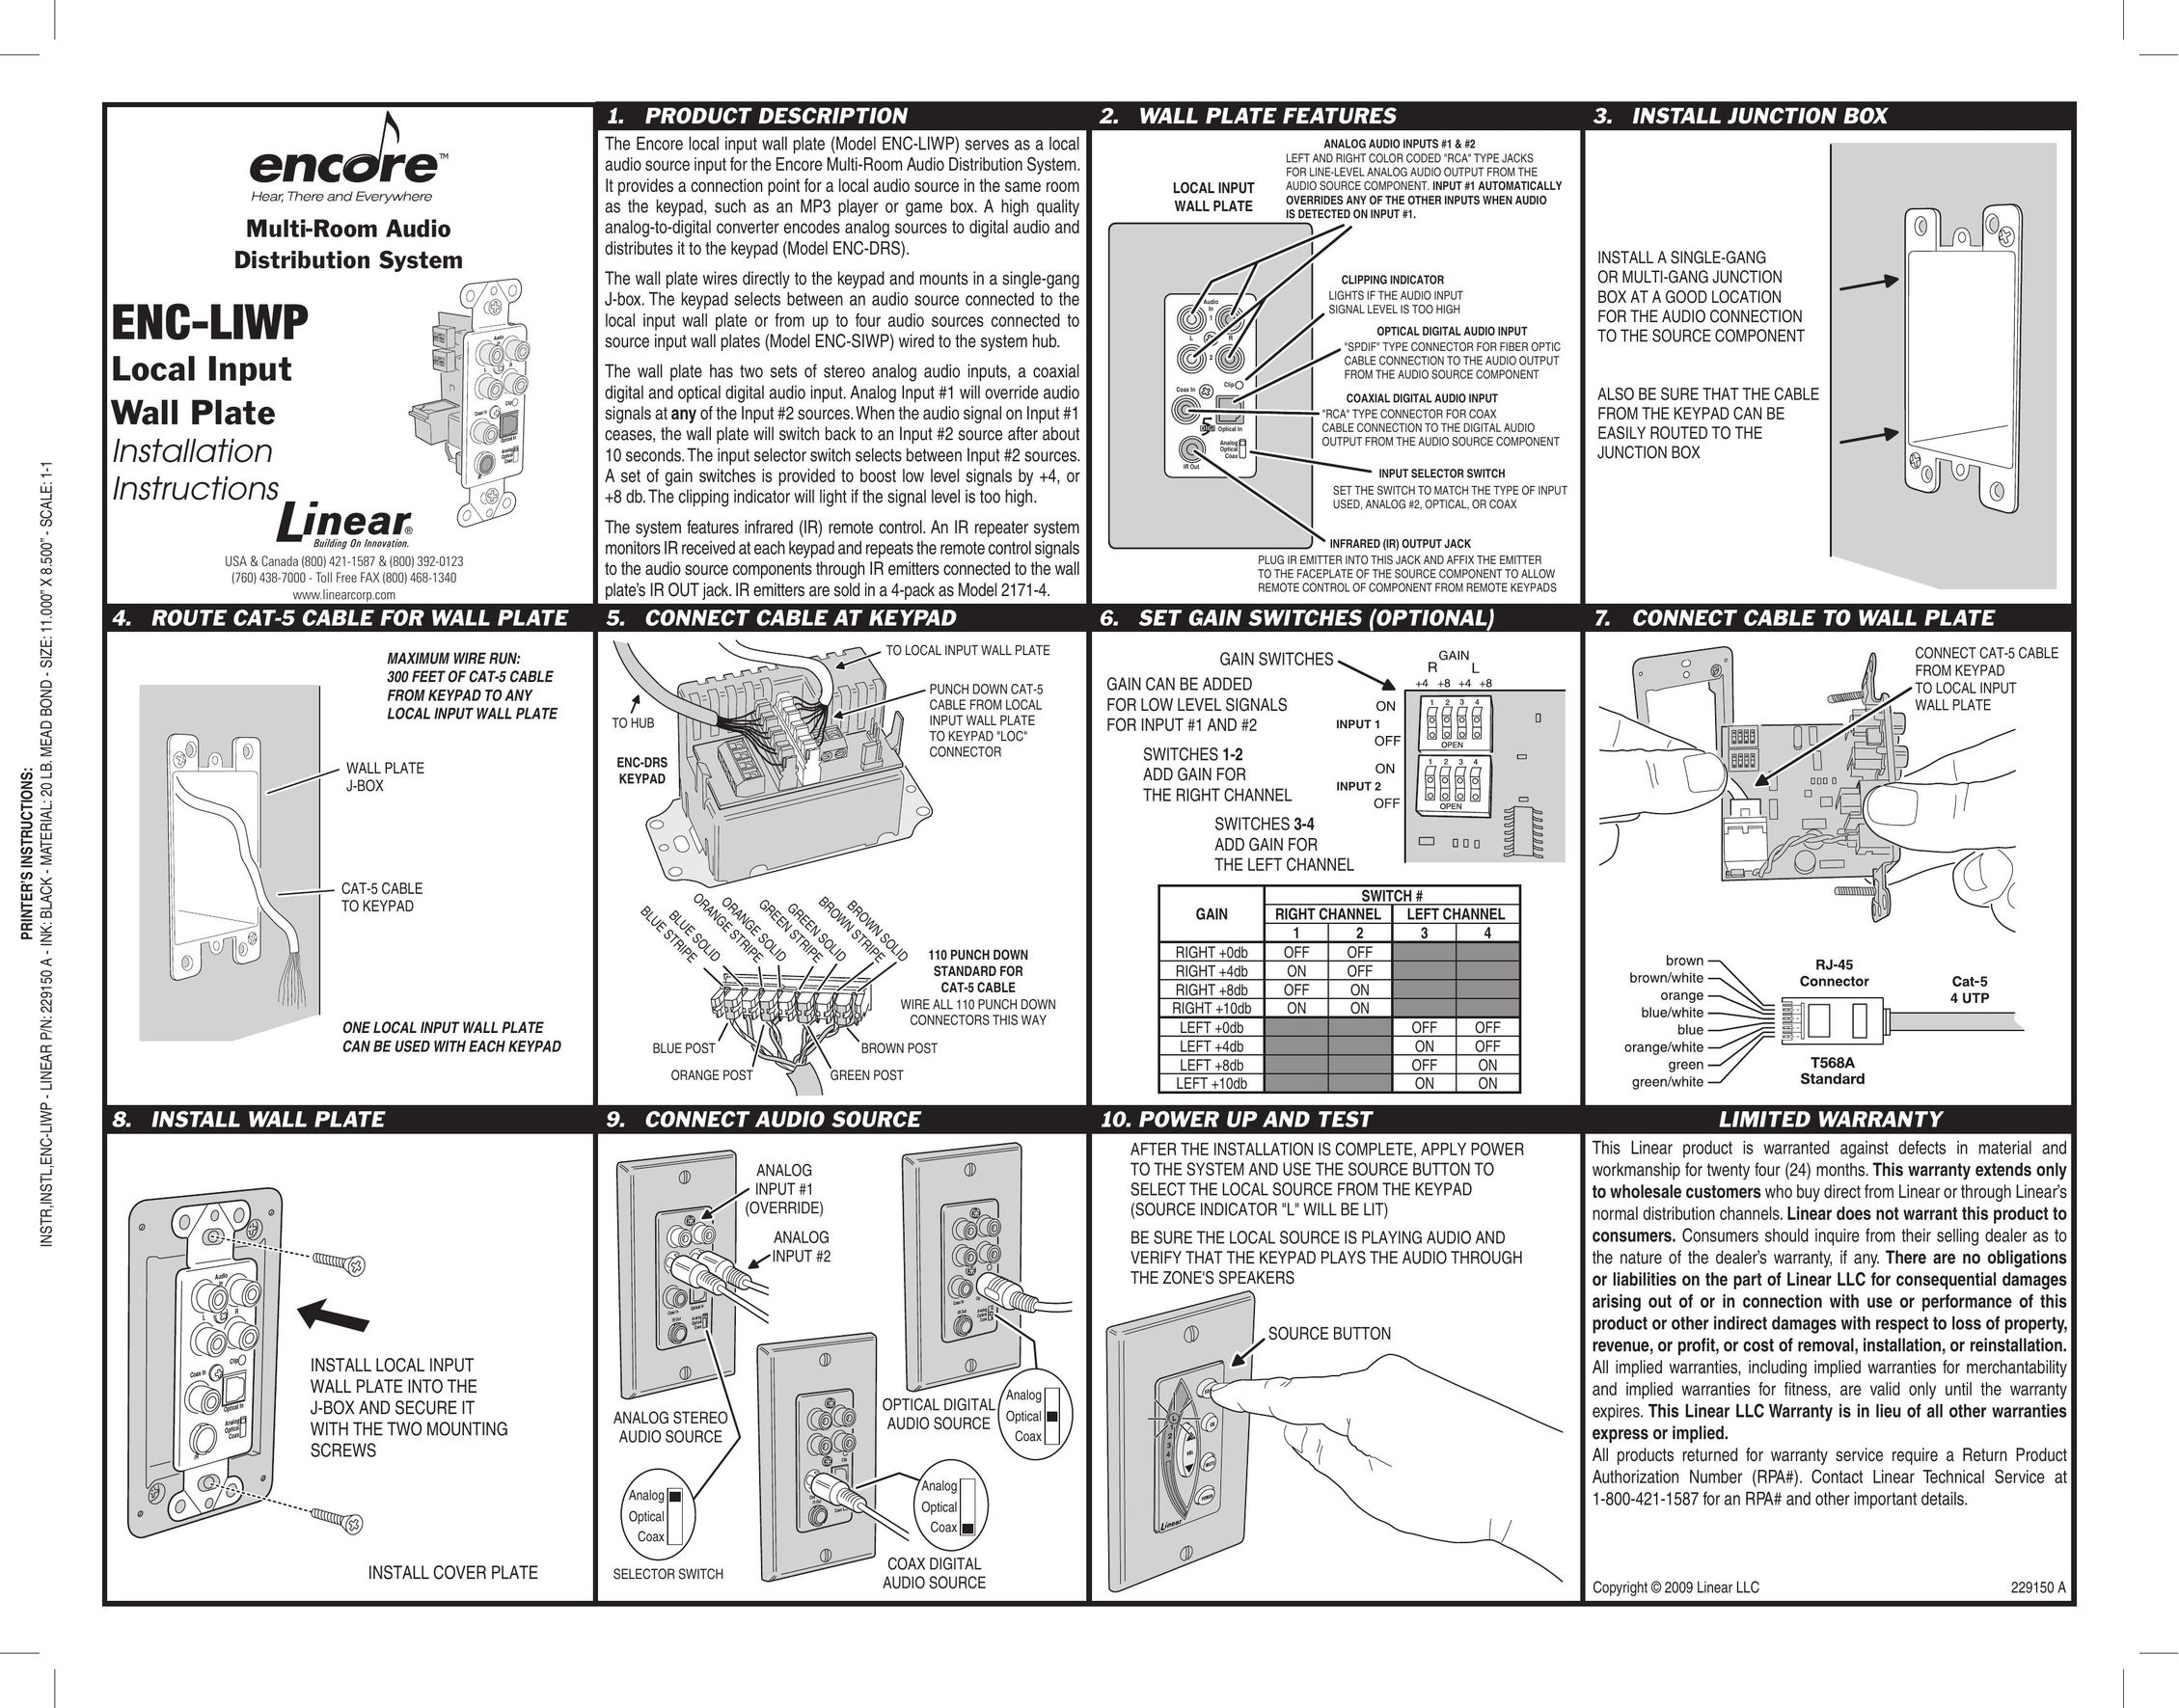 Encore electronic ENC-LIWP Stereo System User Manual